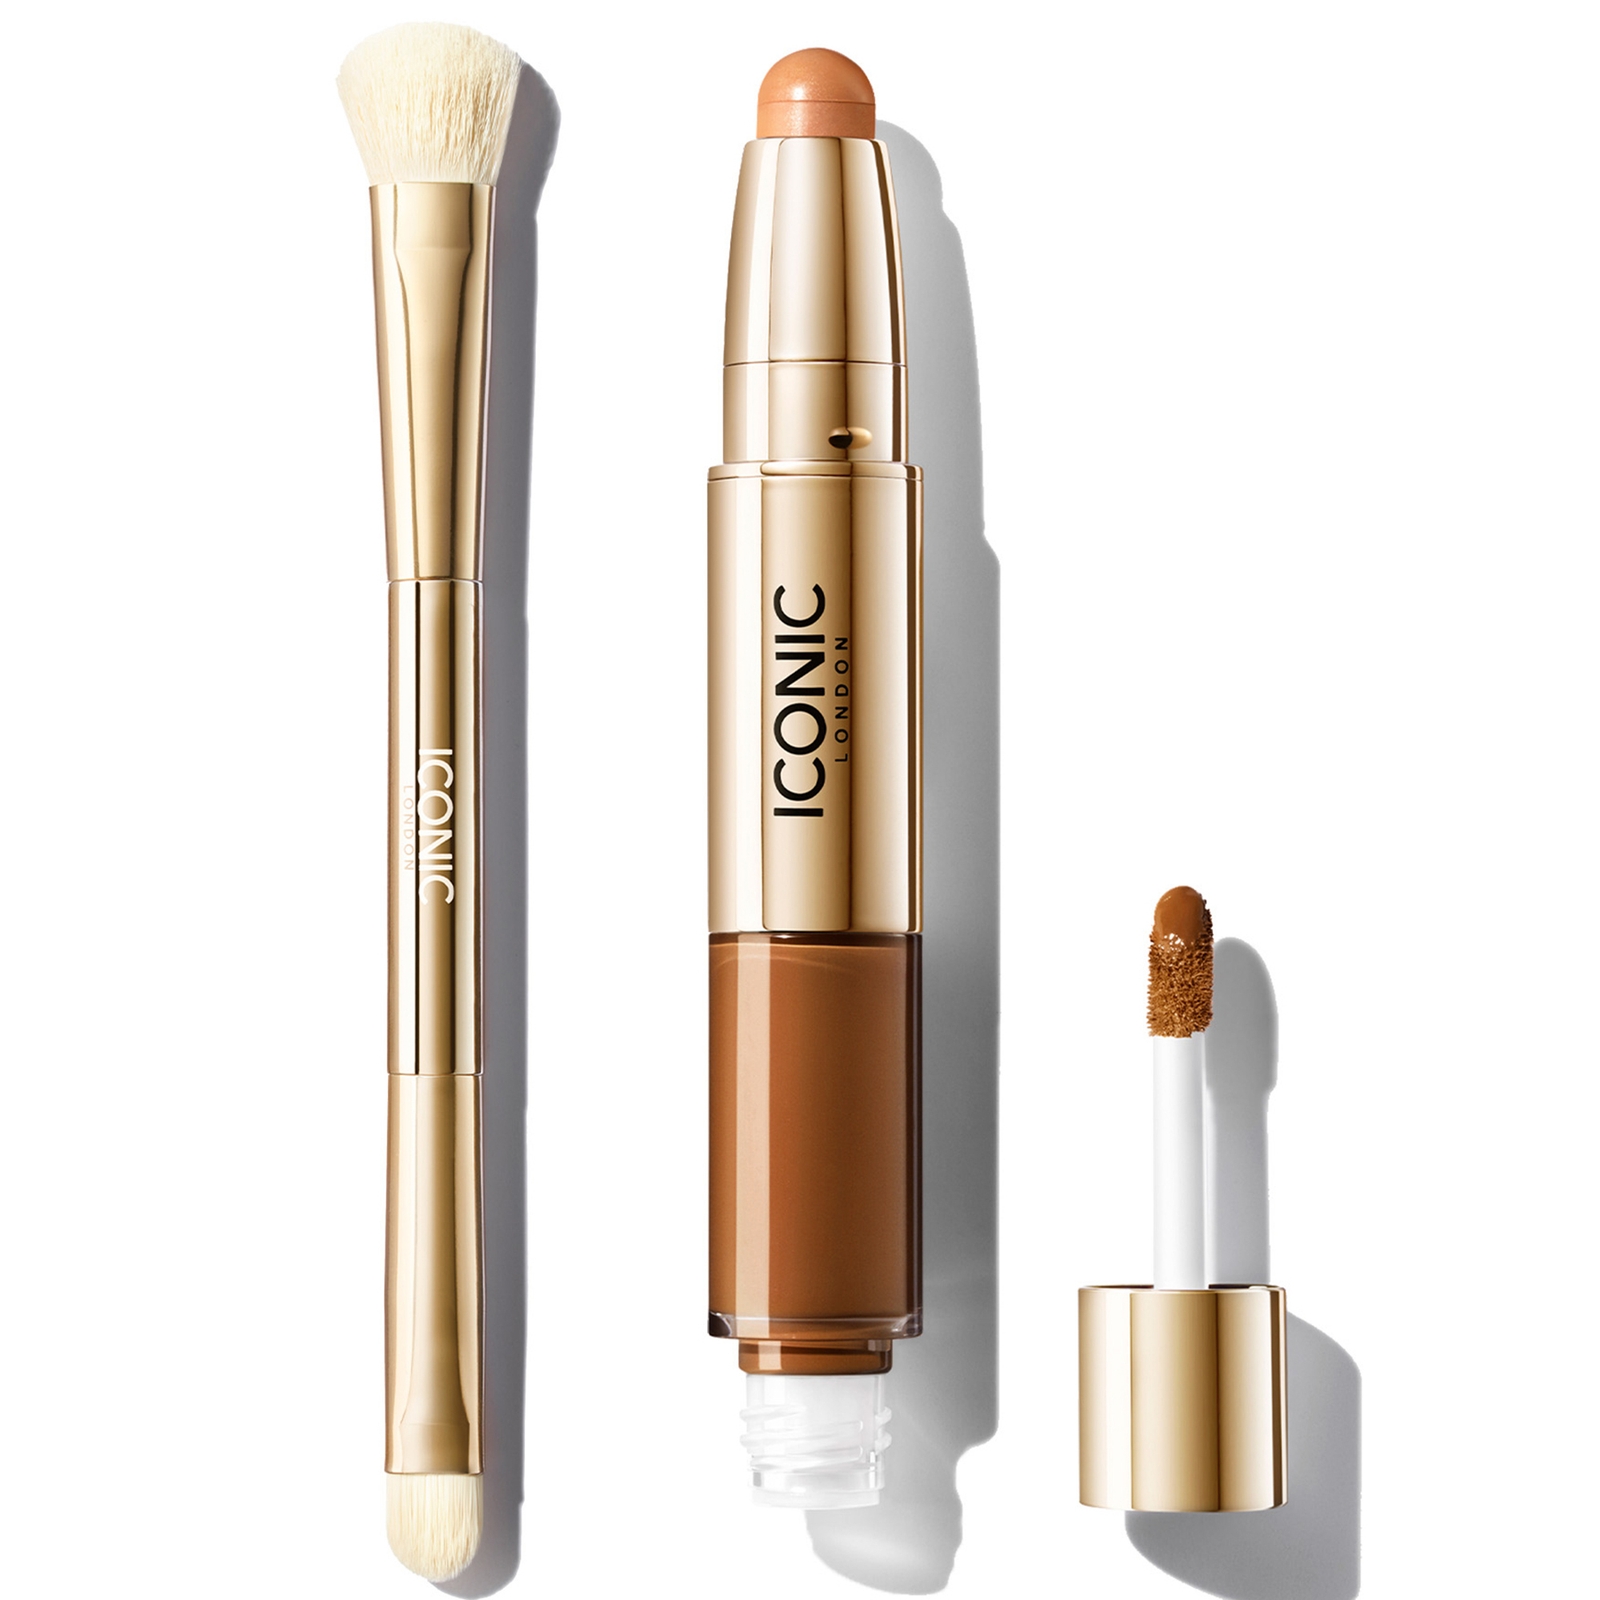 Iconic London Radiant Concealer And Brush Bundle (various Shades) - Neutral Deep